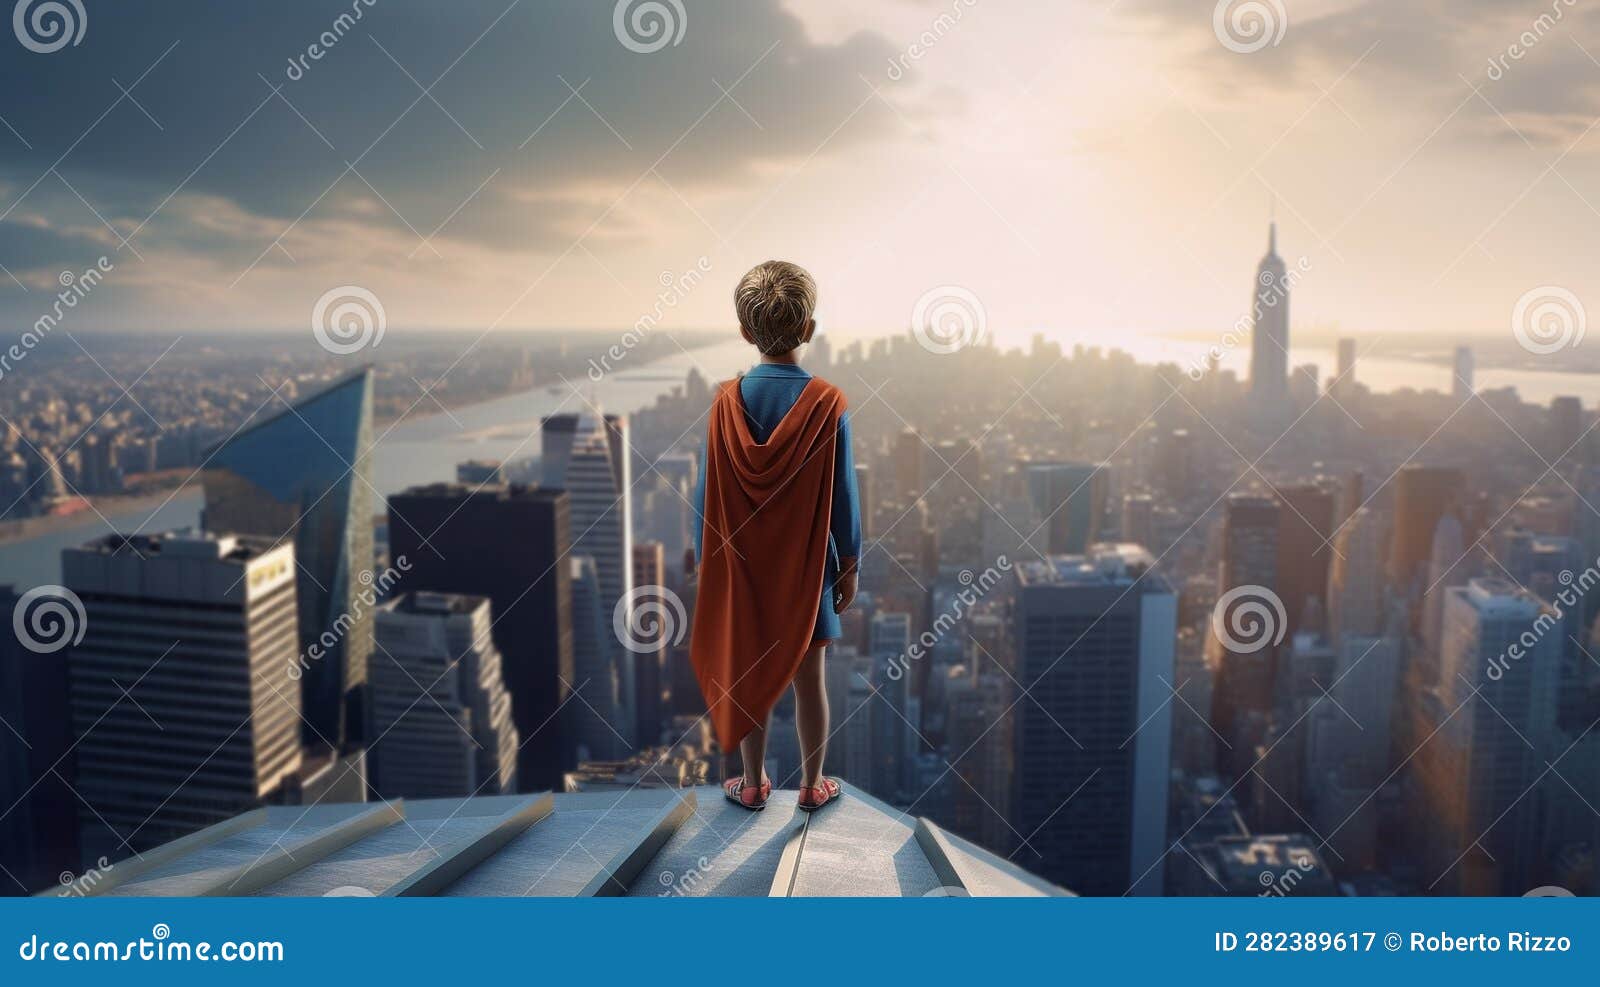 rear view of young boy on top of skycraper dreaming of becoming a superhero.